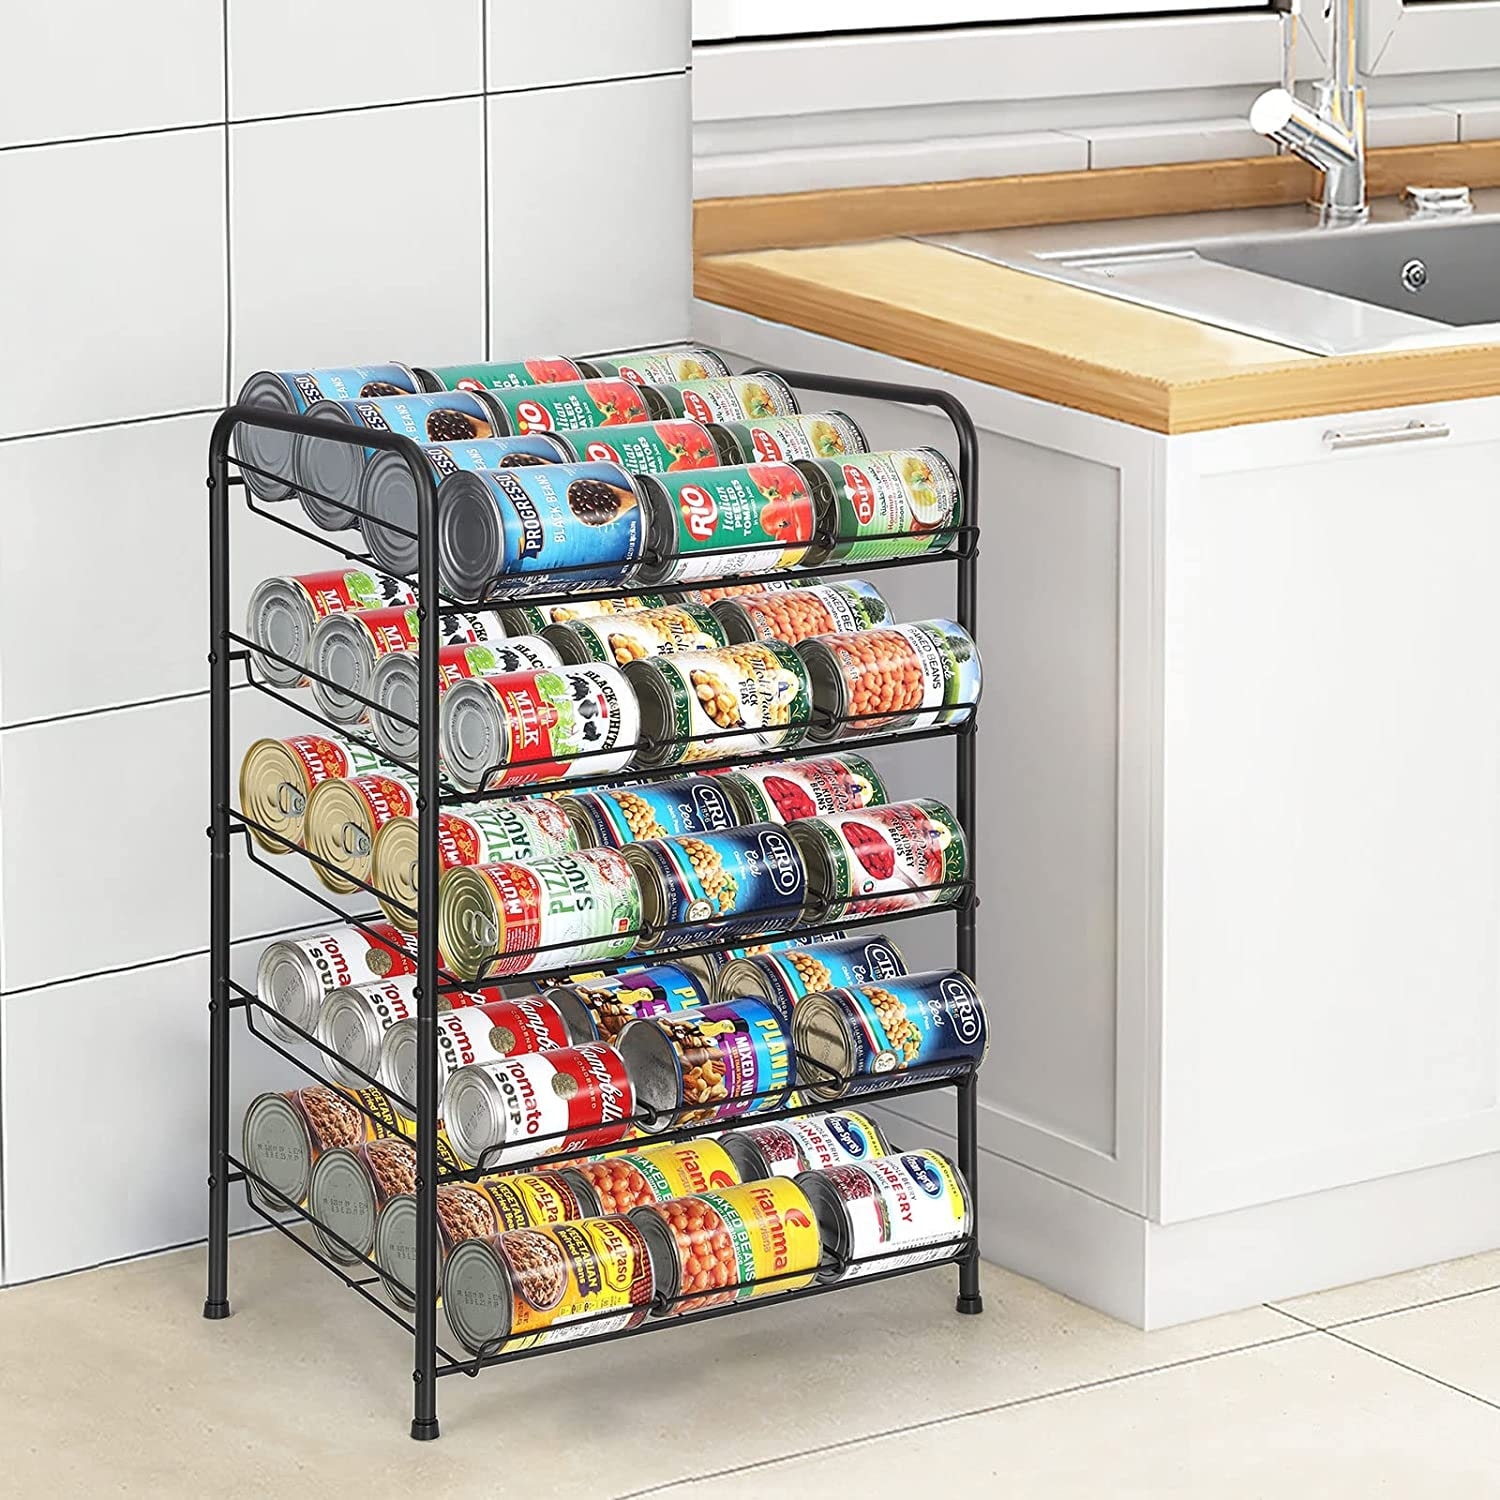 Stackable Can Organizer Holds Upto 36 Cans for Kitchen Cabinet or